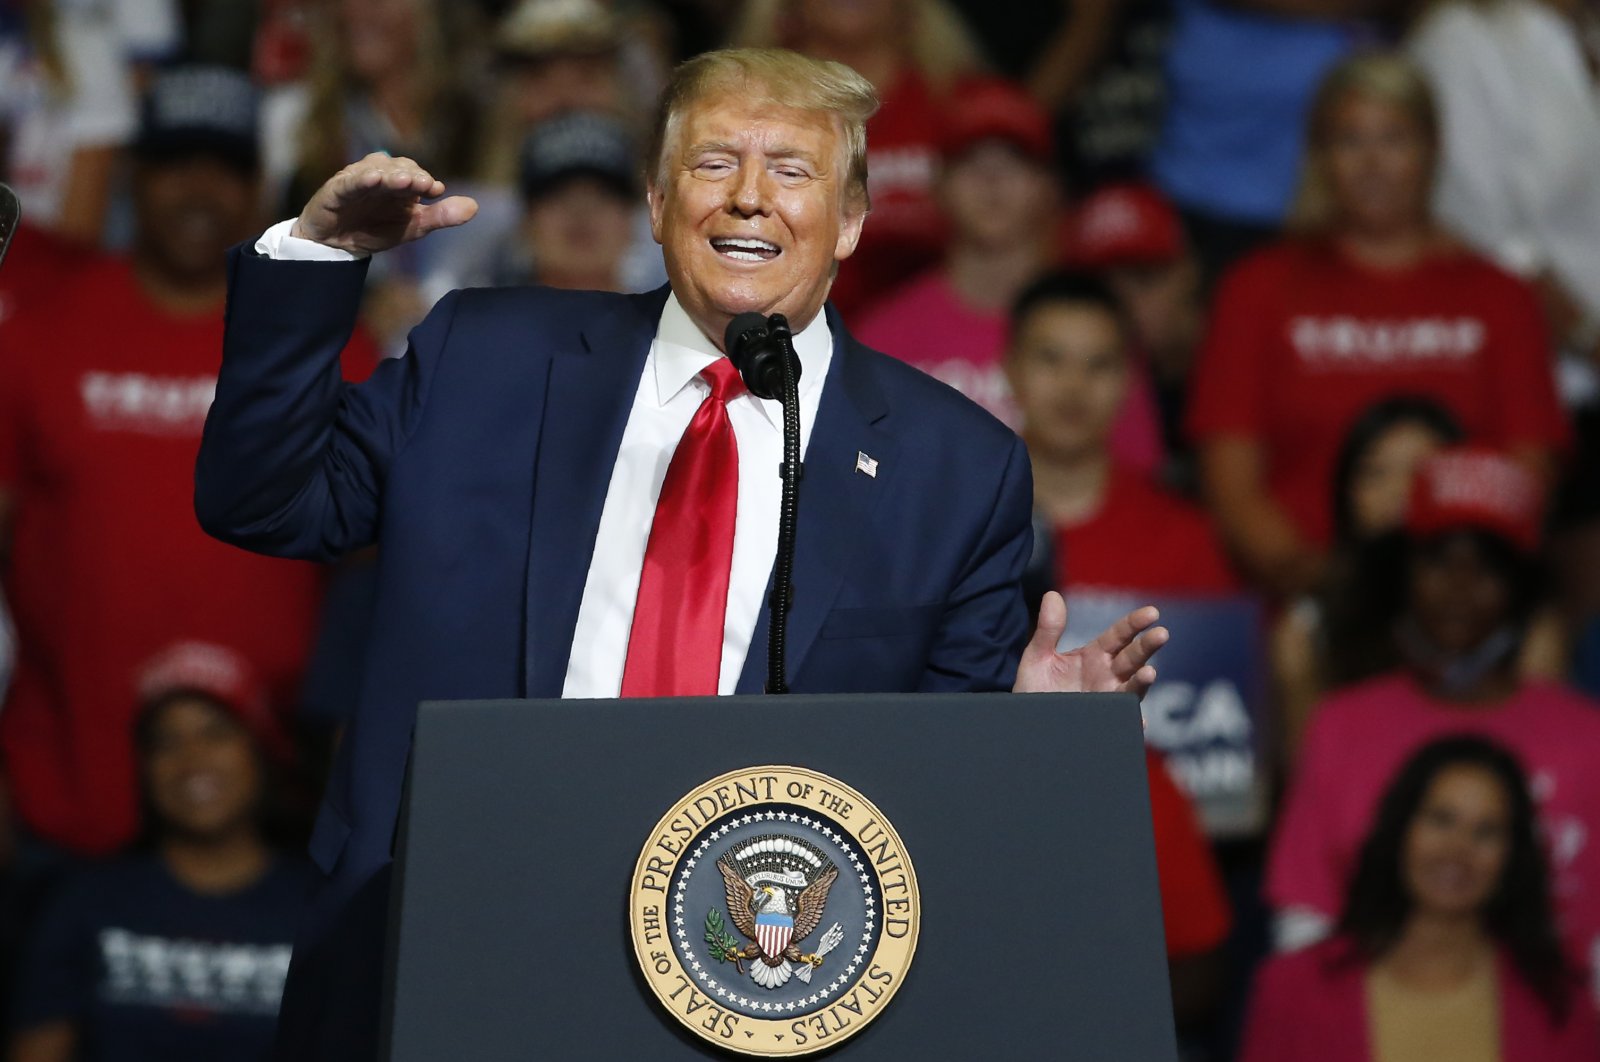 In this June 20, 2020, photo, President Donald Trump speaks during a campaign rally at the BOK Center in Tulsa, Okla. (AP Photo/Sue Ogrocki)